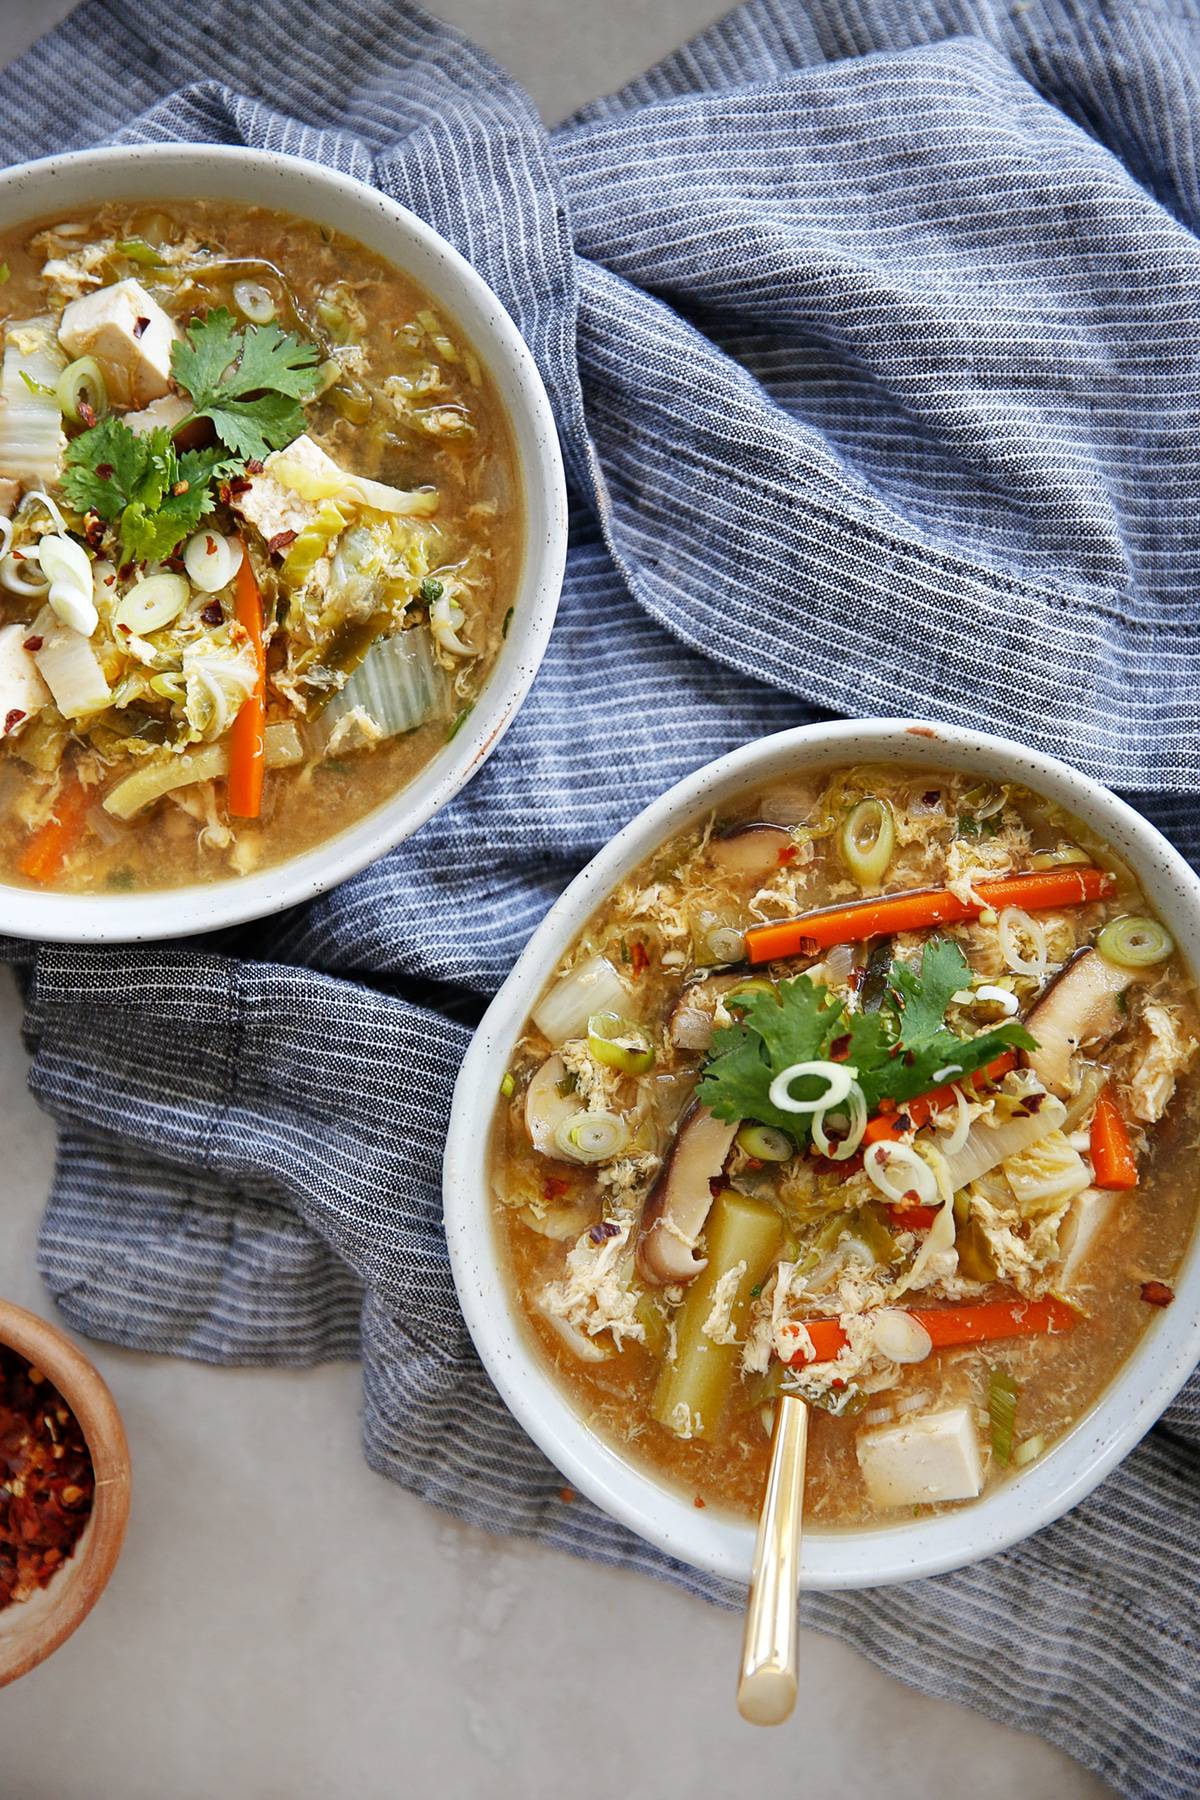 Two portions of cooked hot and sour soup recipe